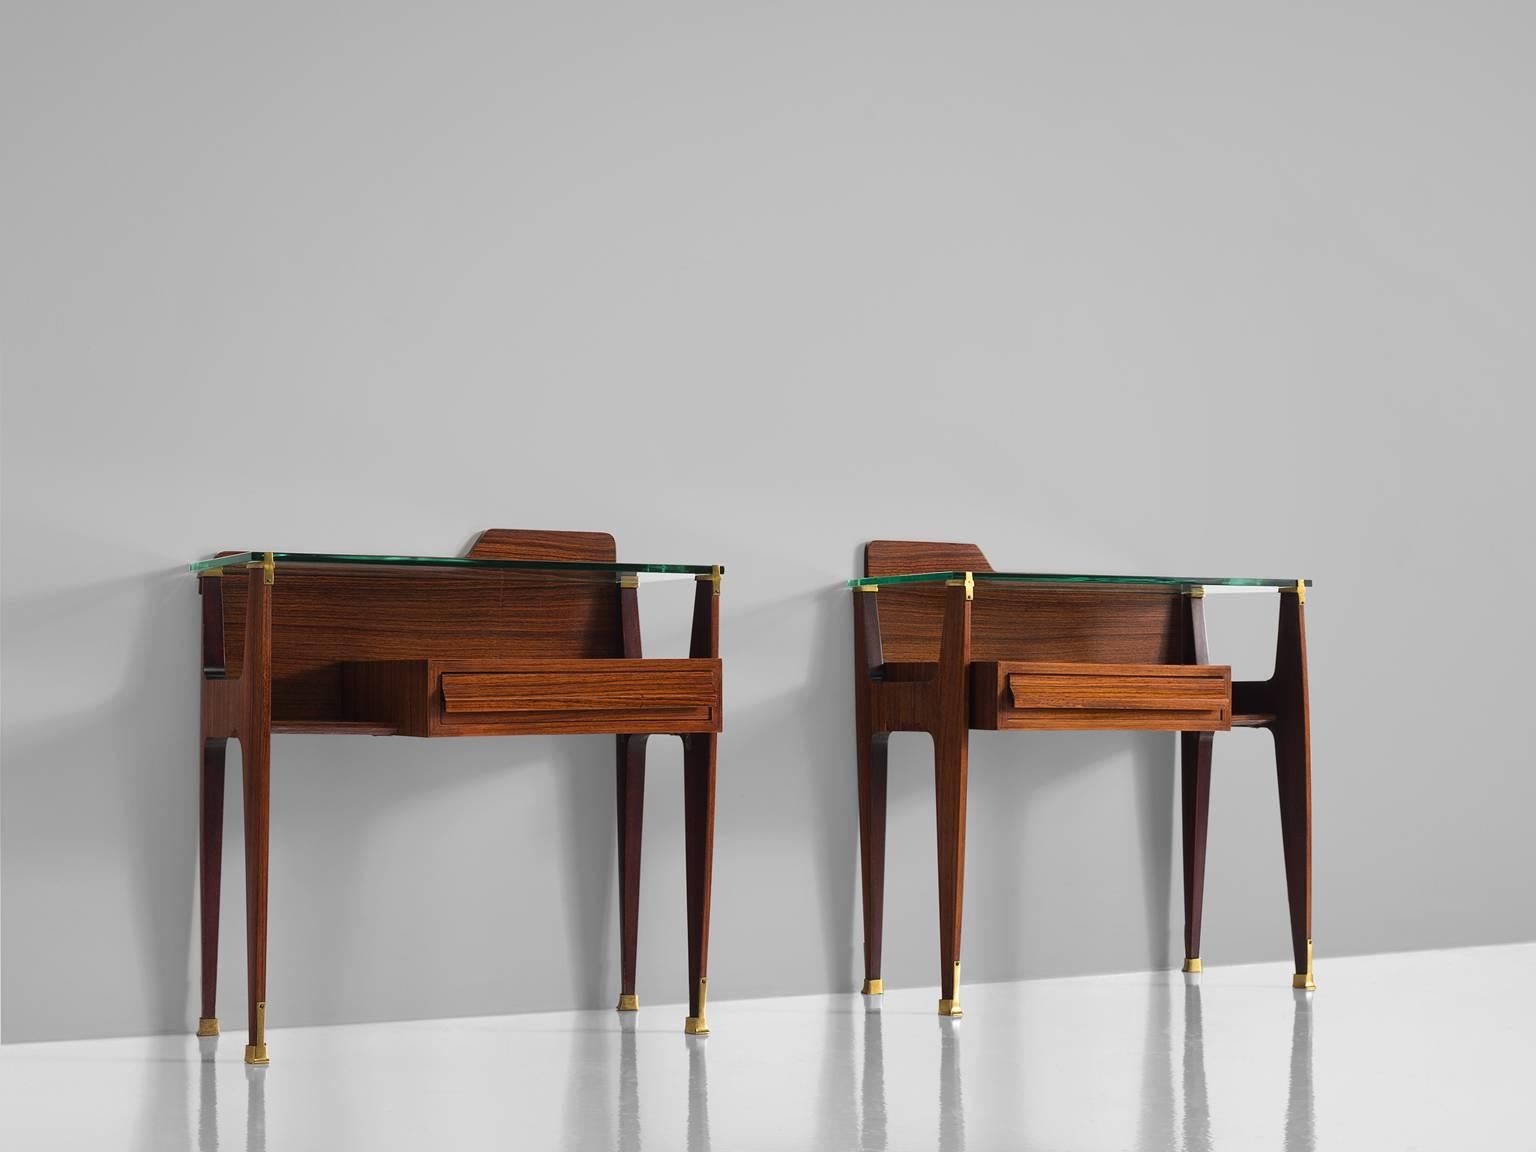 Nightstands, wood, glass and brass, Italy, 1950s.

These two side tables or nightstands are both refined and elegant in every way. The glass top stretches a little but over the outer edges of the solid, precisely crafted oak legs. These sculptural